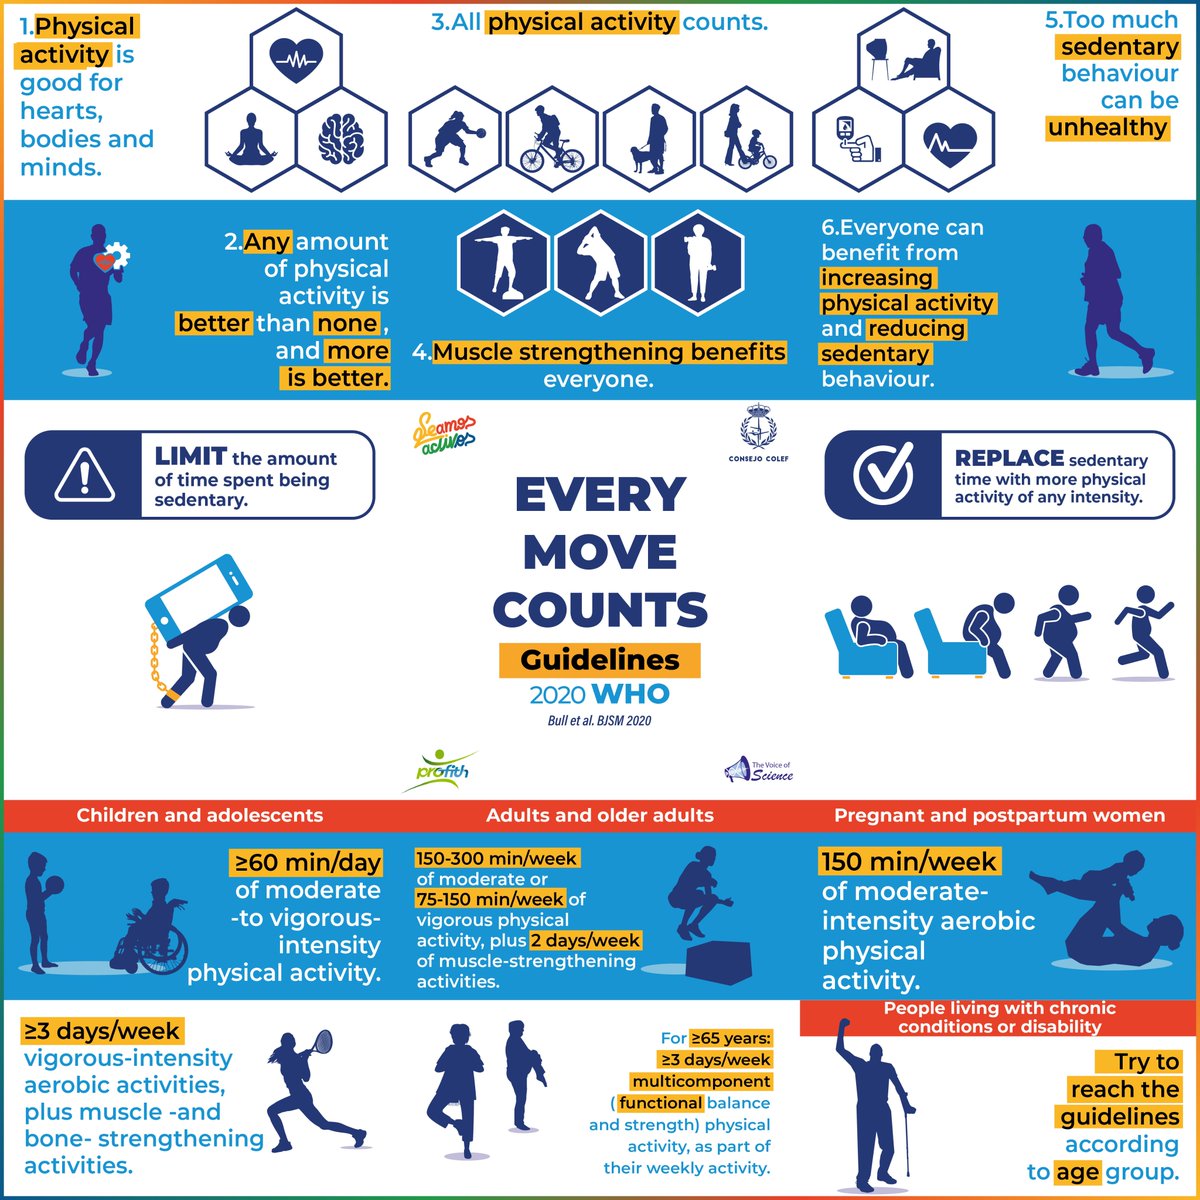 Every move counts on World Day for Physical Activity #WDPA2022